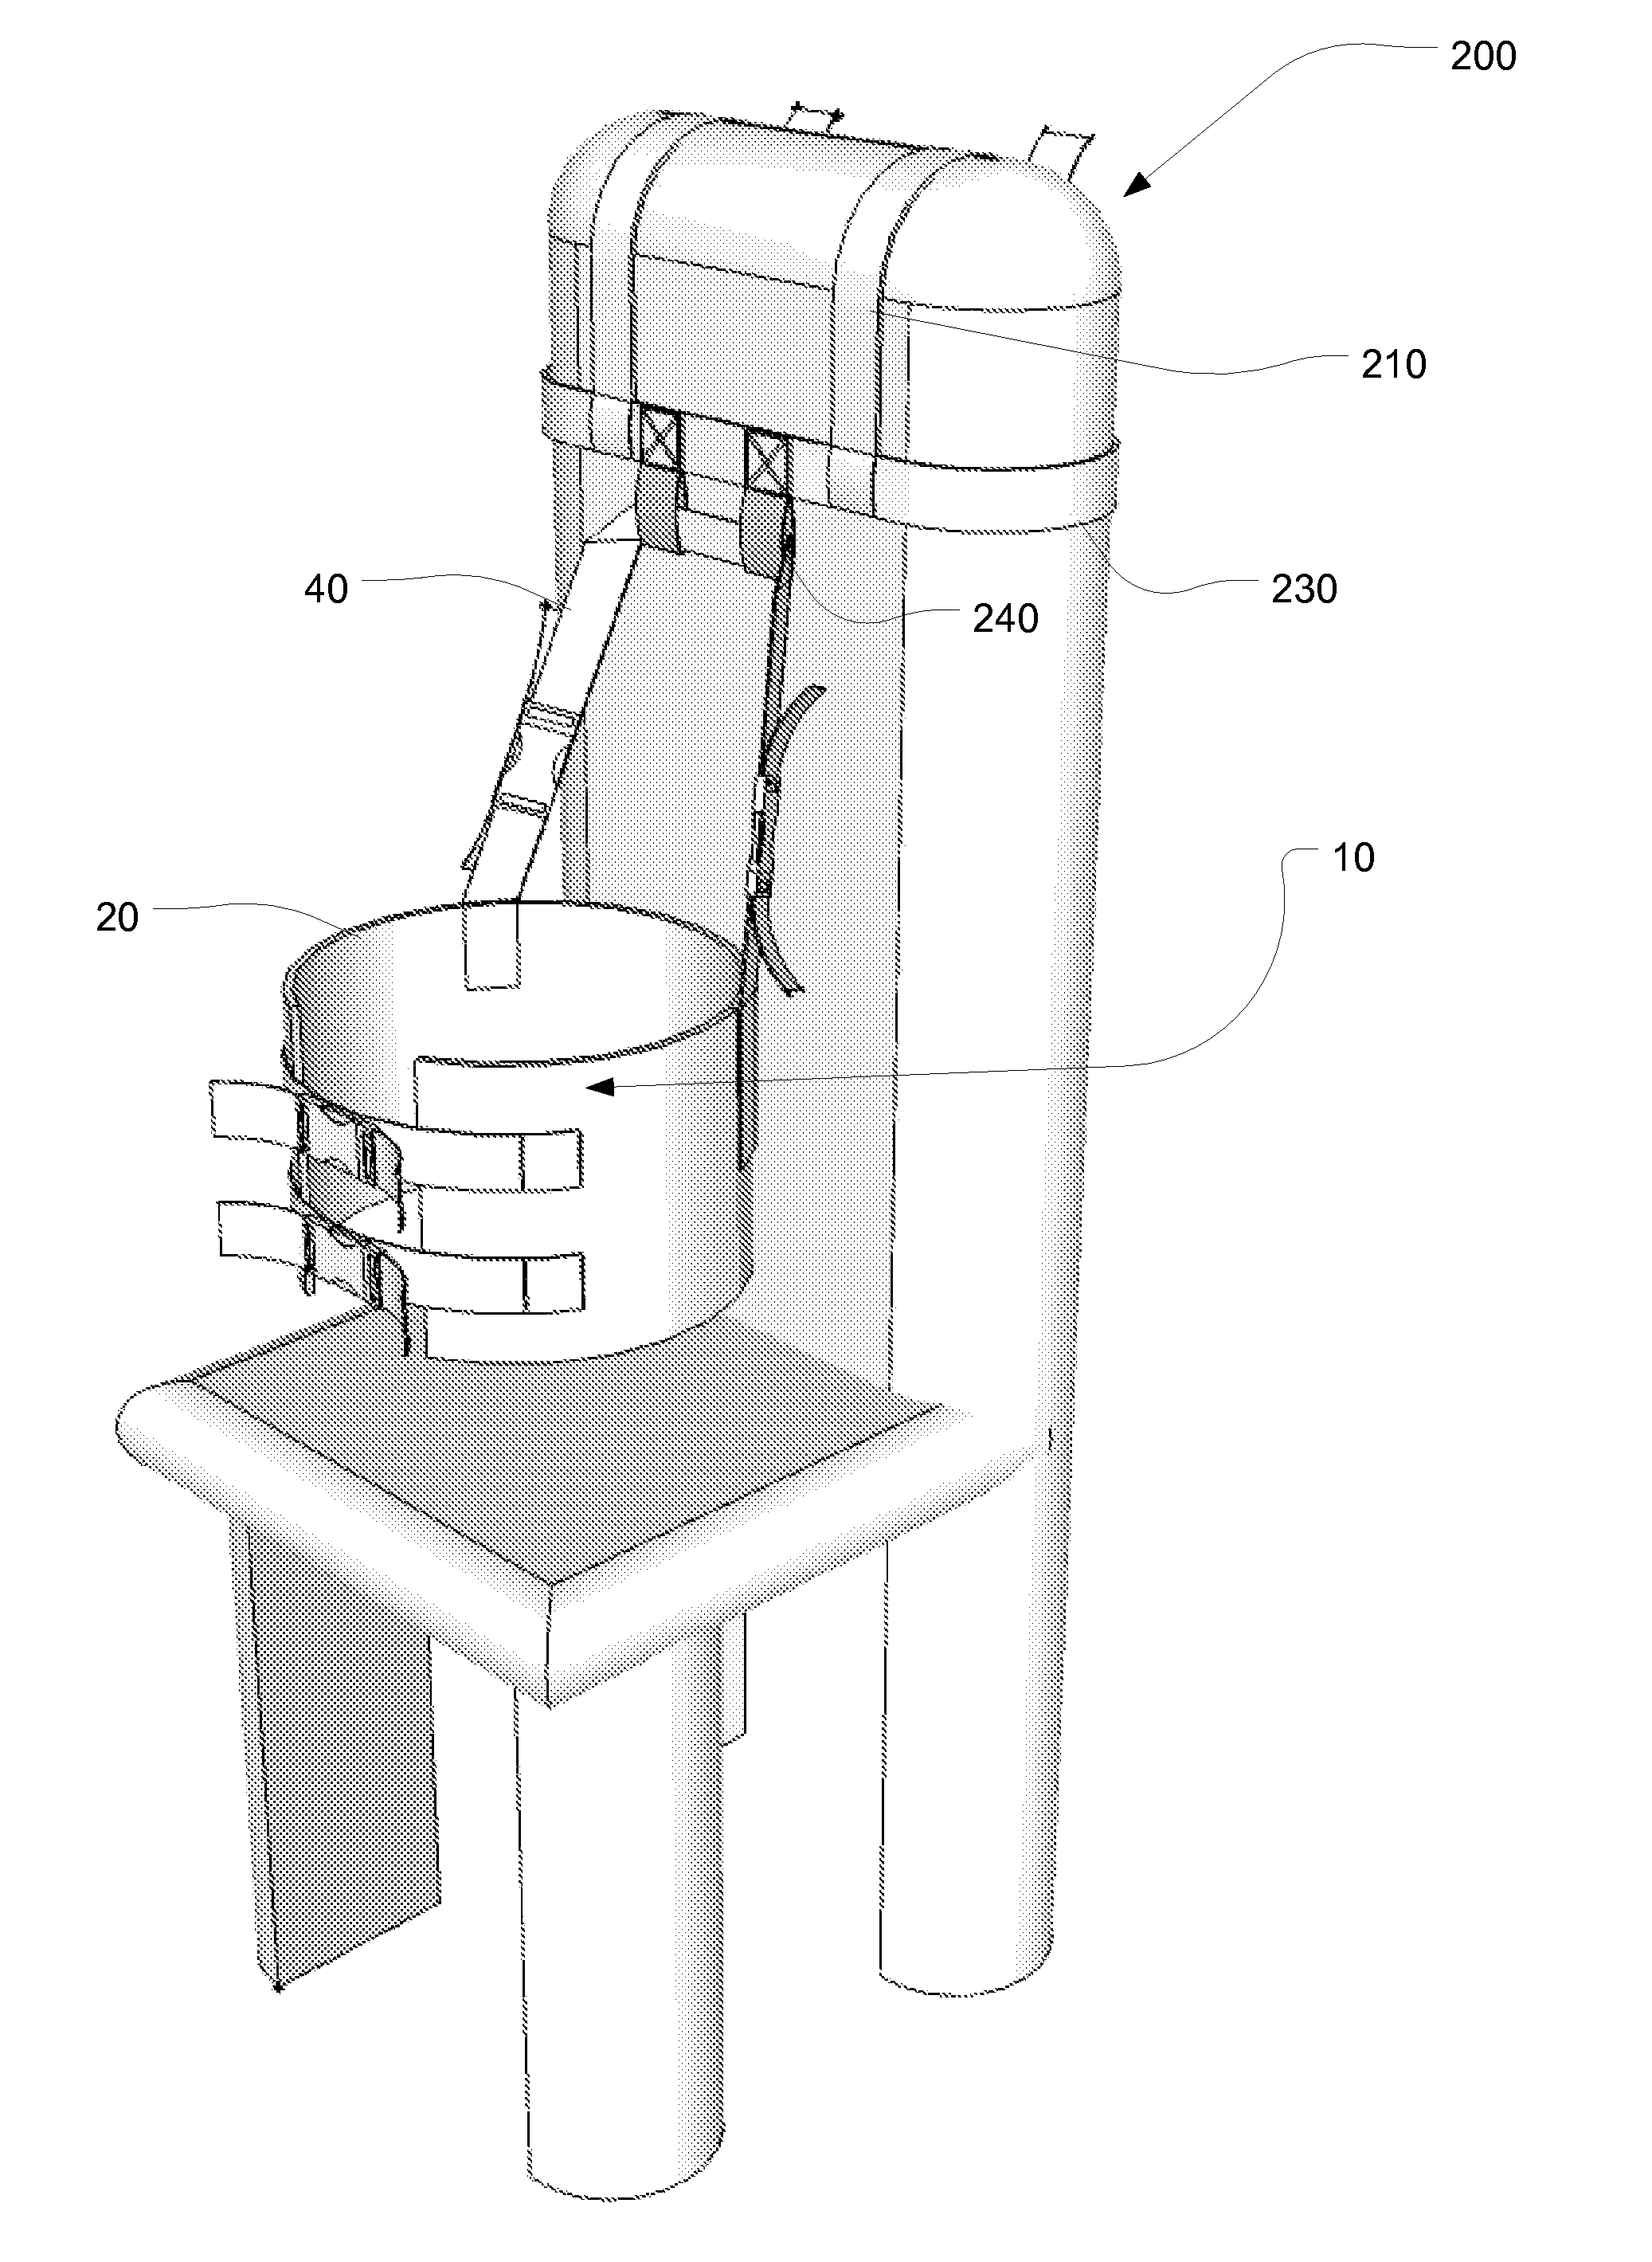 Portable device for unloading lower back while sitting